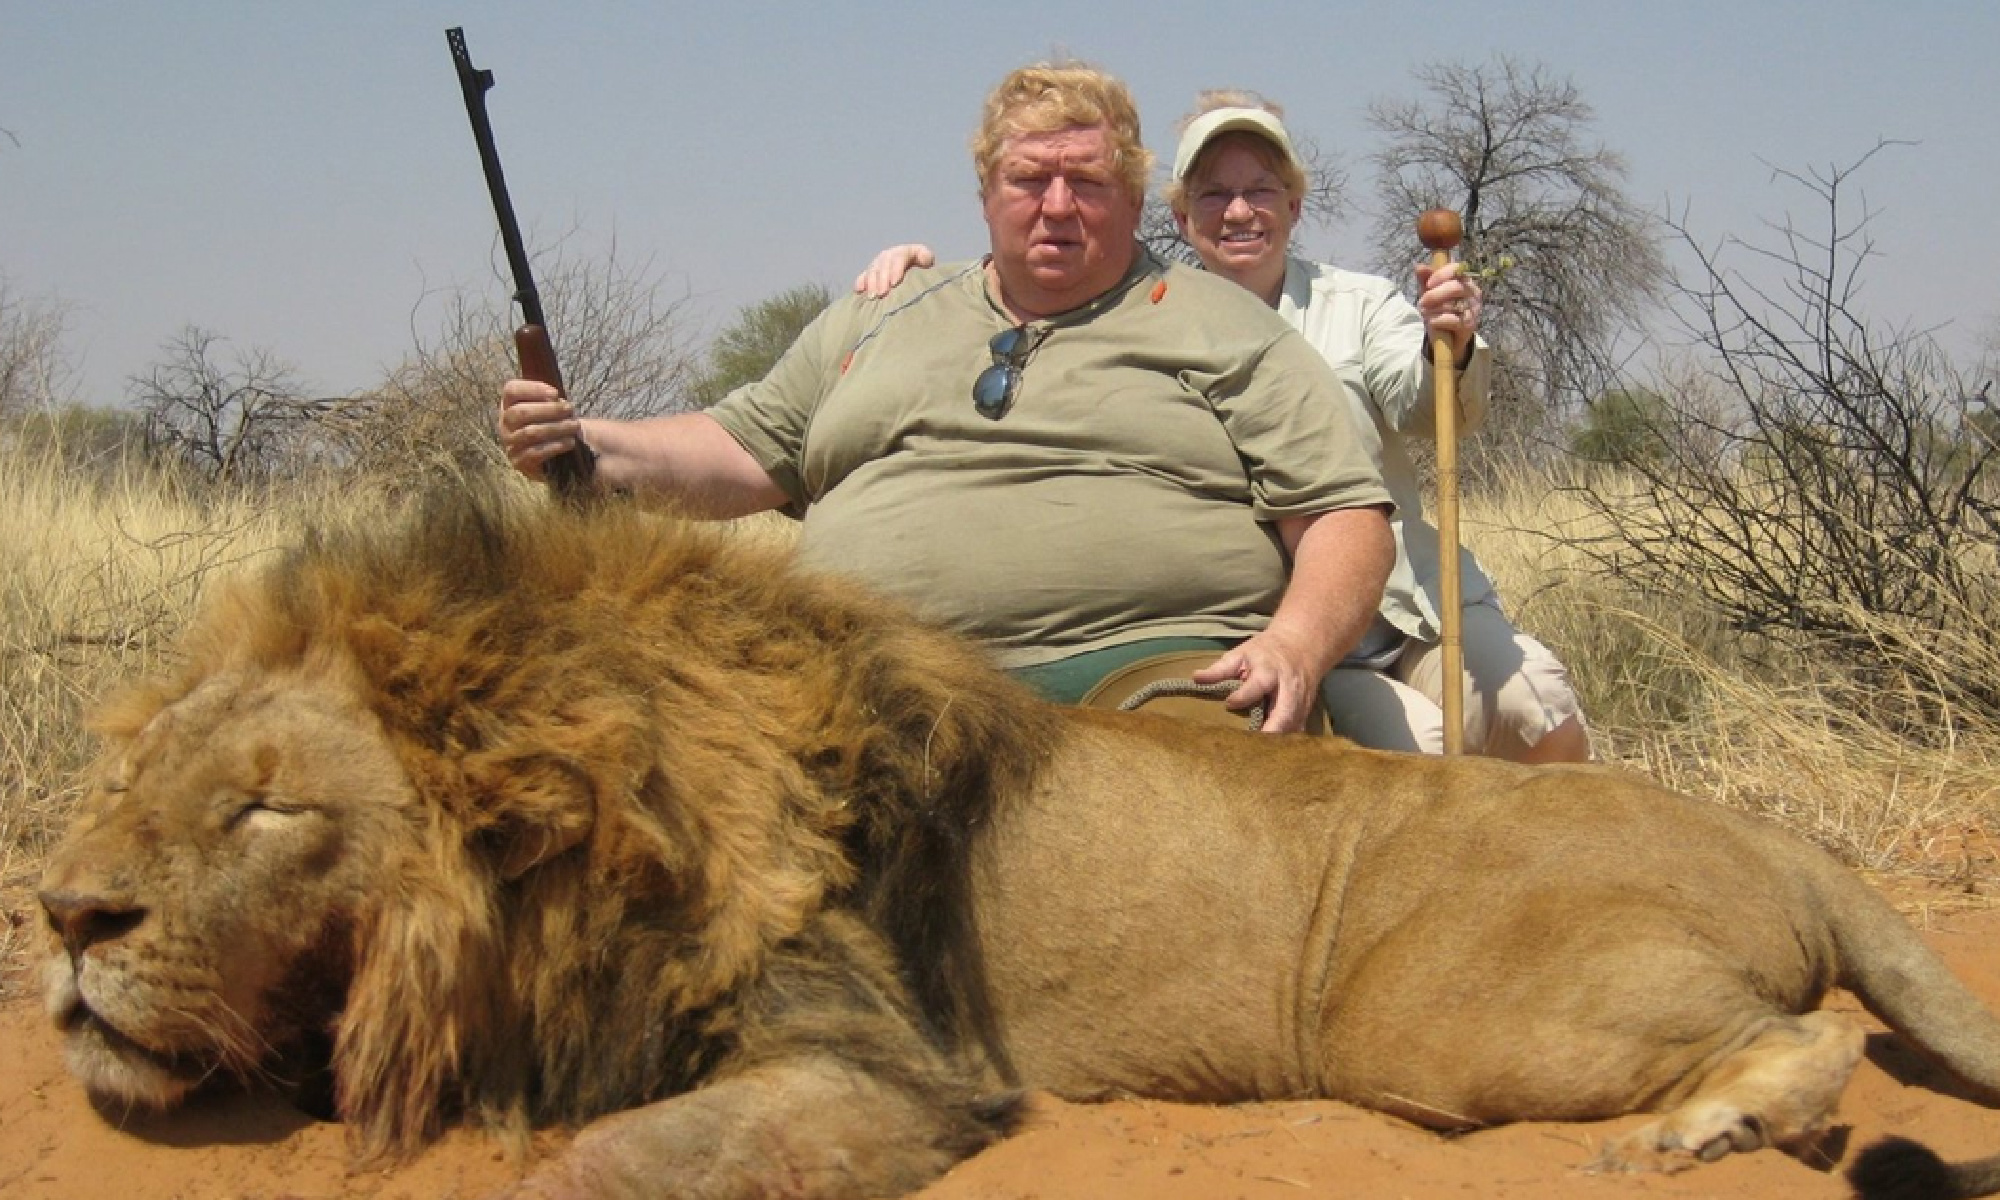 Viral Story on Hunter Eaten by Lions Is a Fraud. Here’s Where It Came From